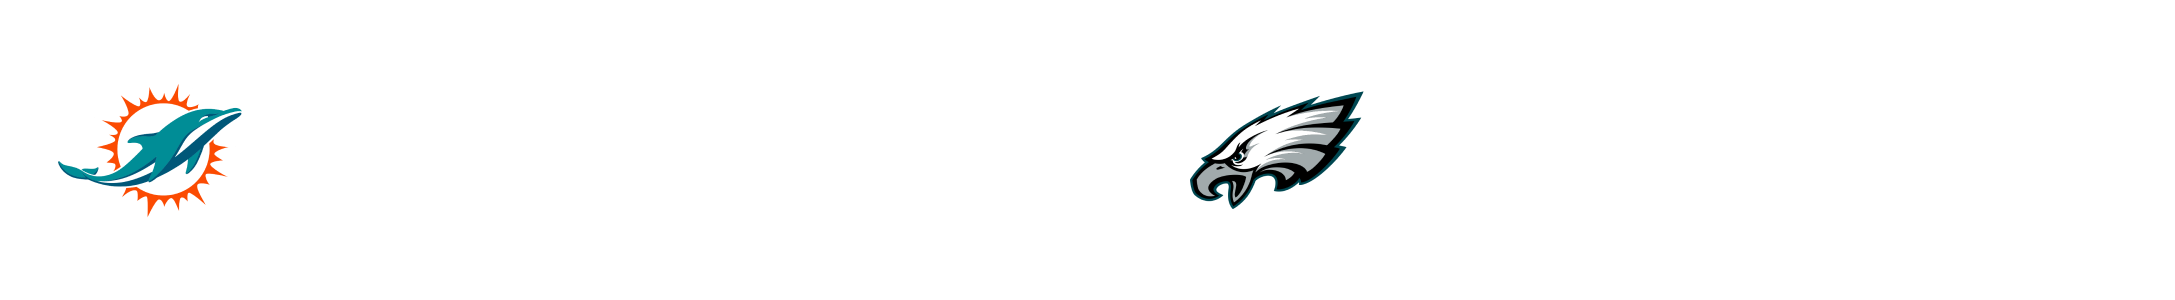 is the eagles game on peacock tonight